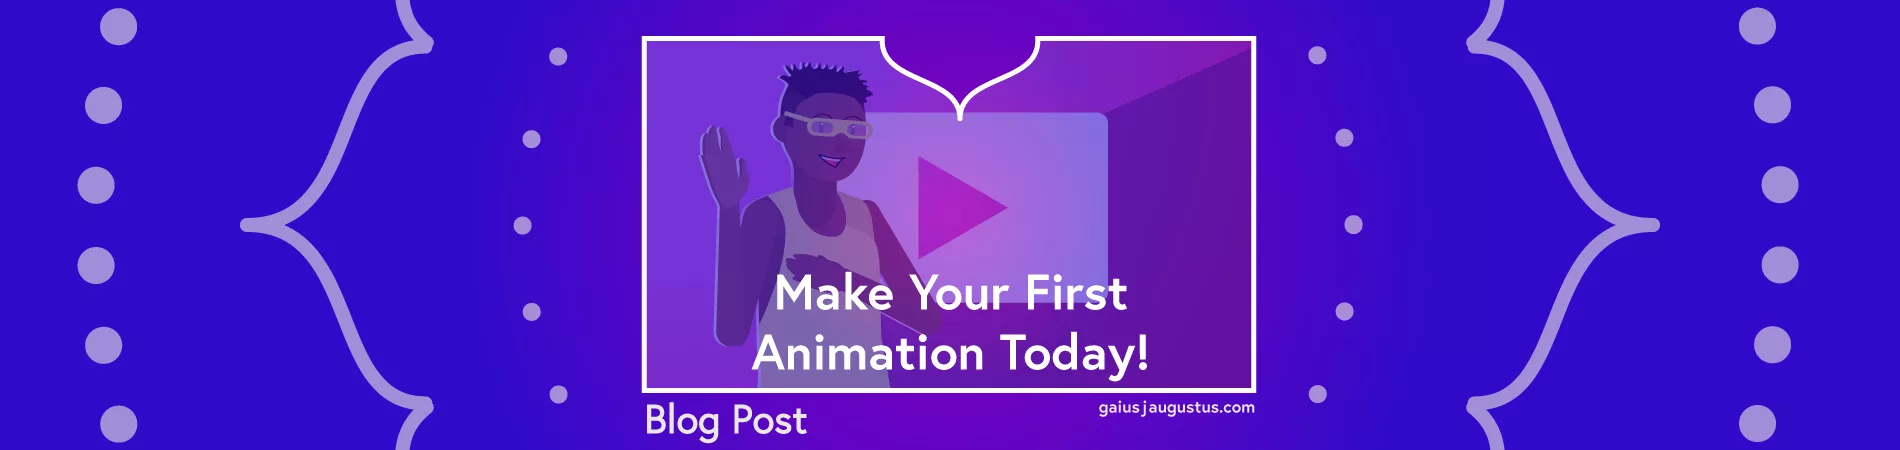 Create Your First Animation Today